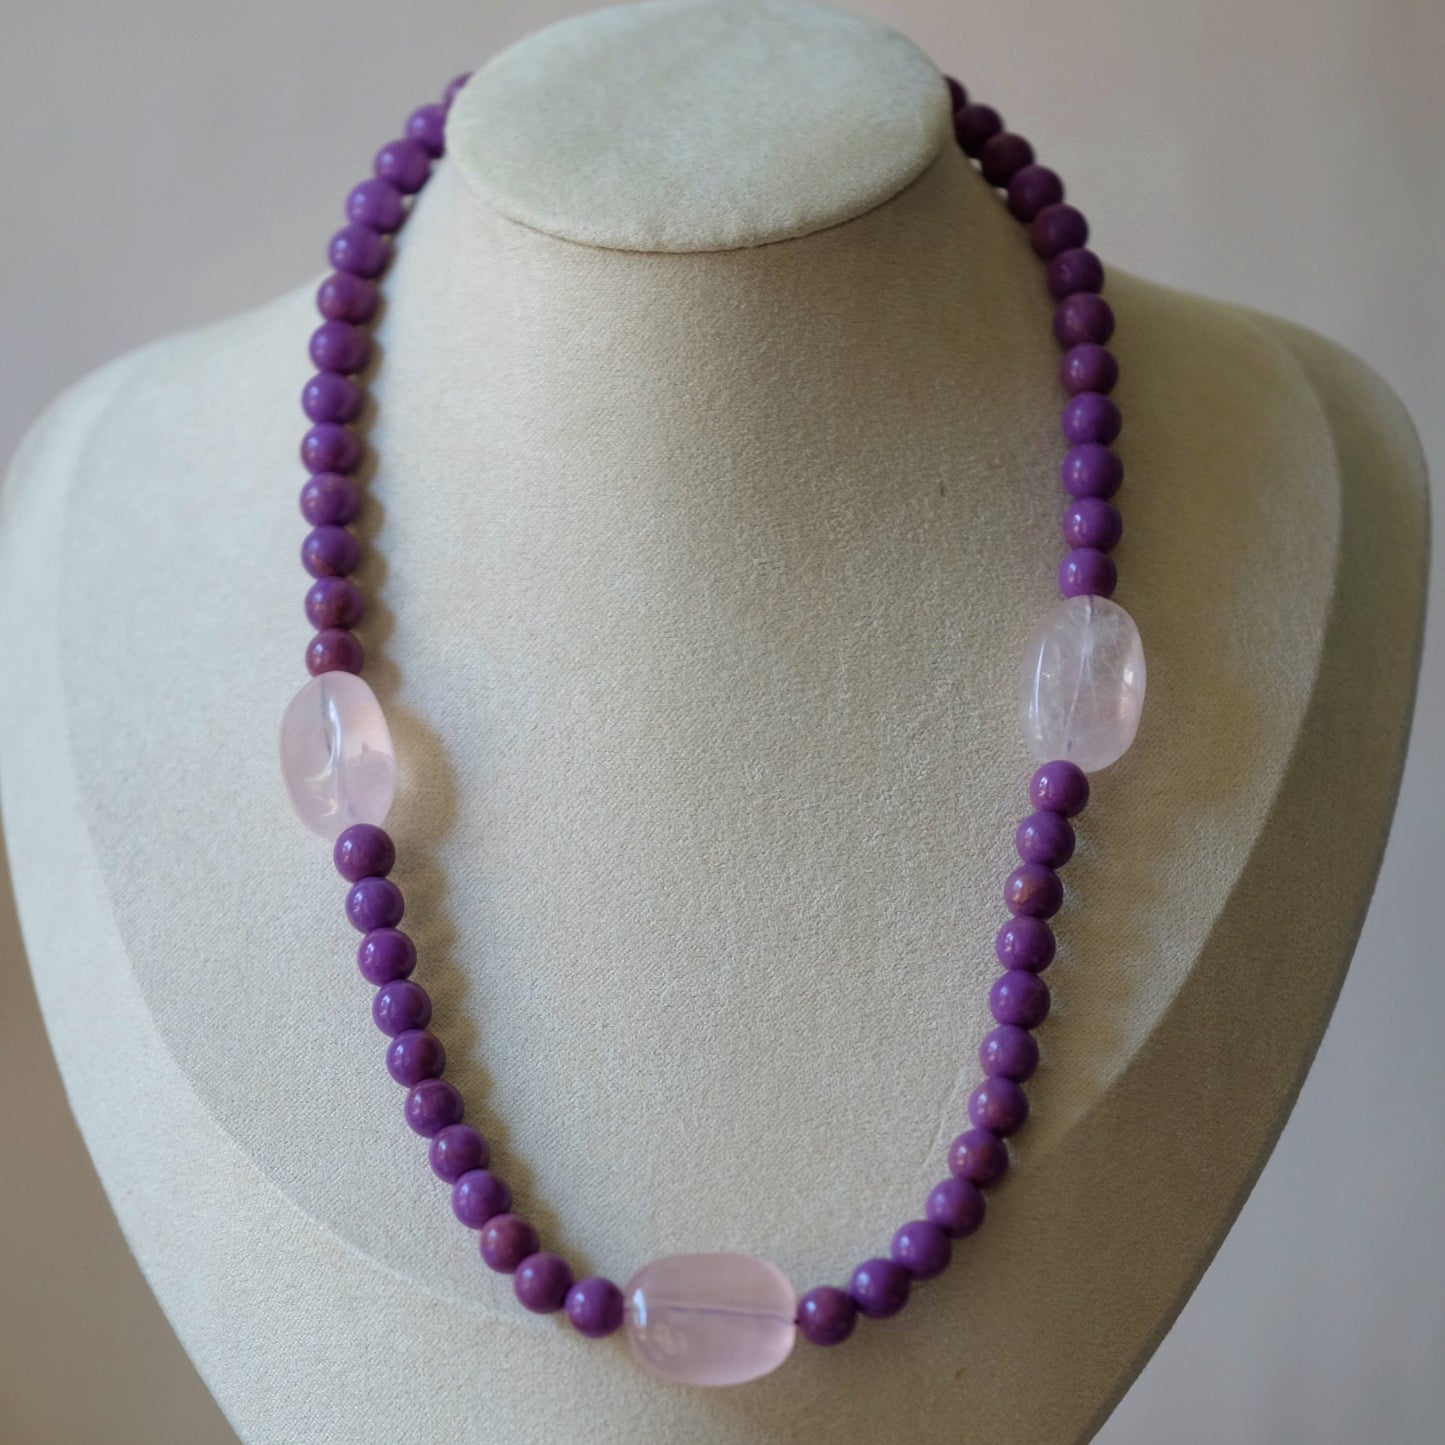 Candy Necklace with Natural Pink Quartz